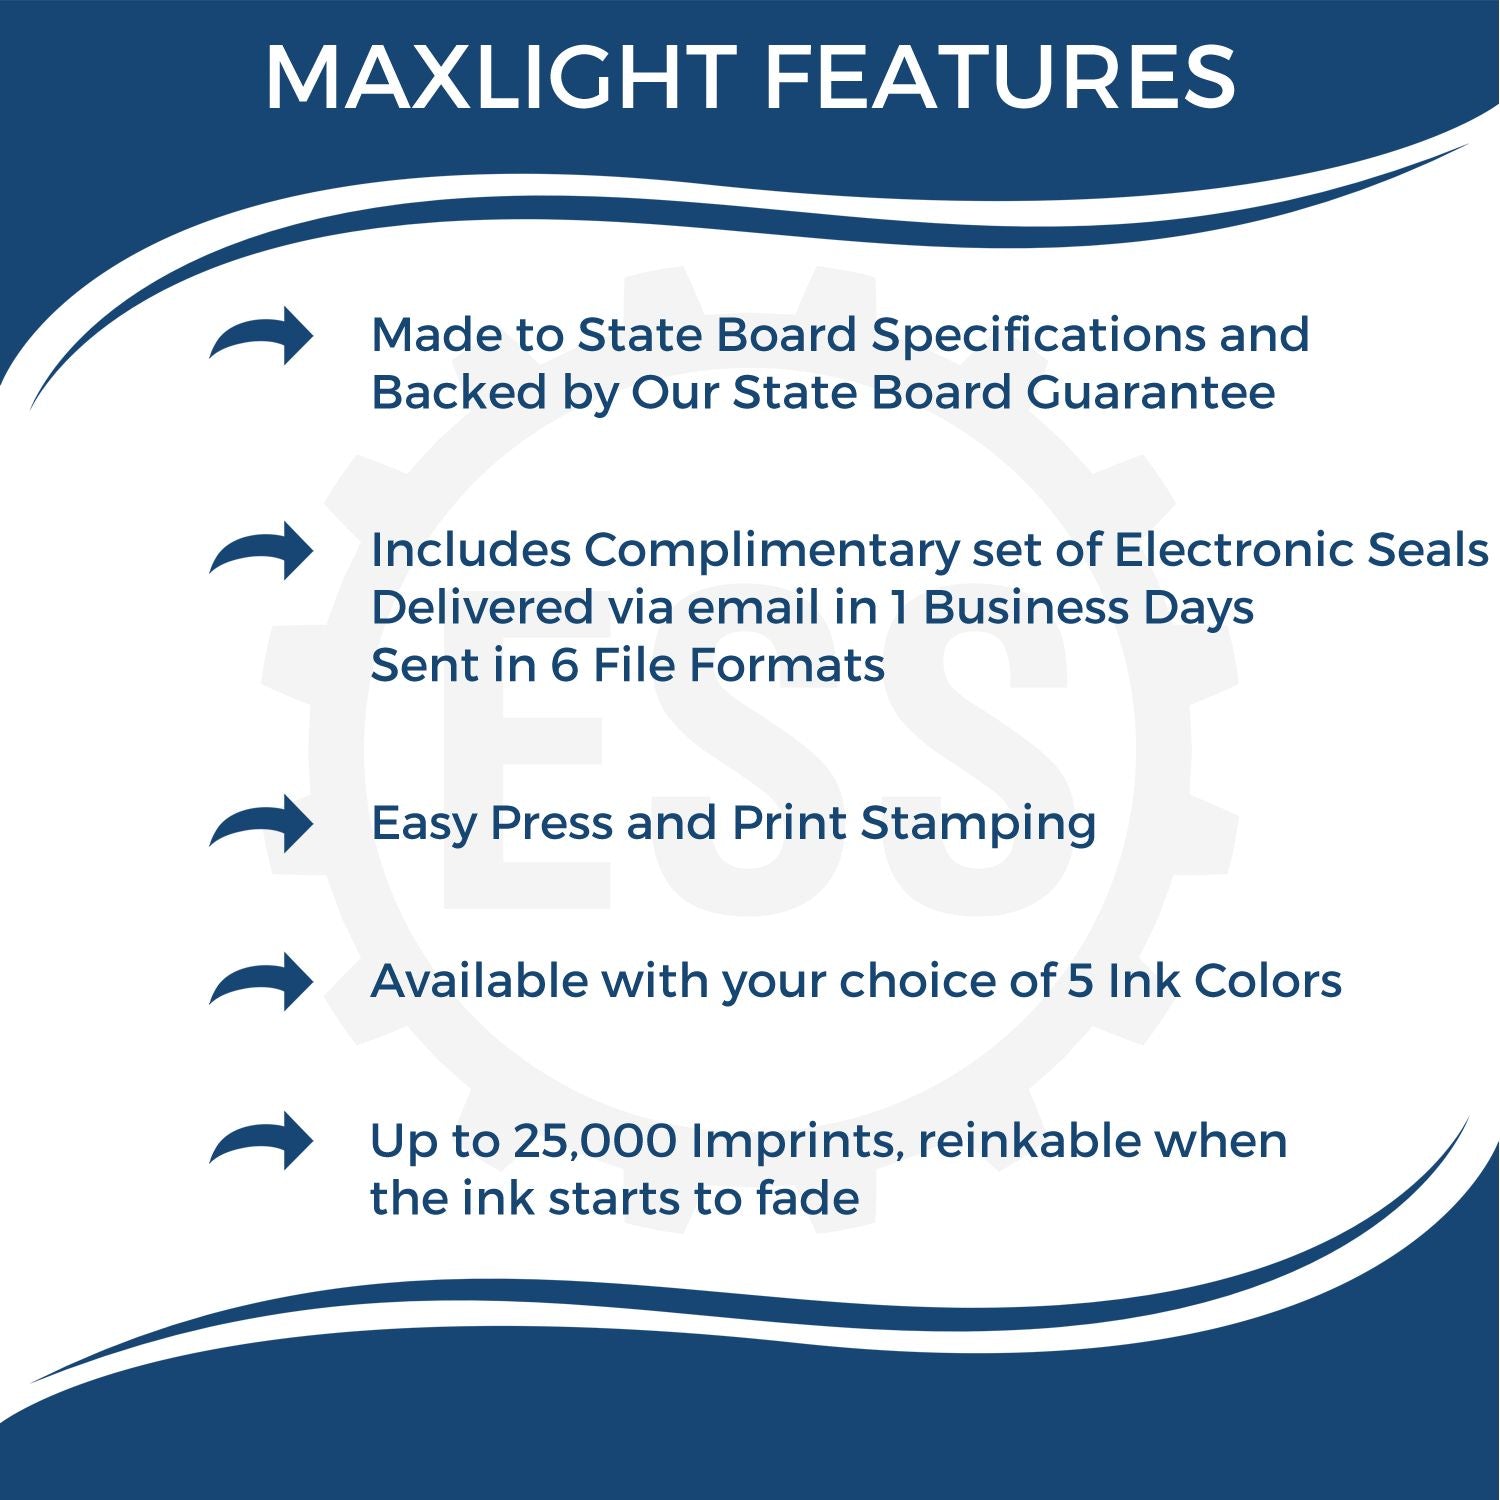 A picture of an infographic highlighting the selling points for the Premium MaxLight Pre-Inked Delaware Landscape Architectural Stamp